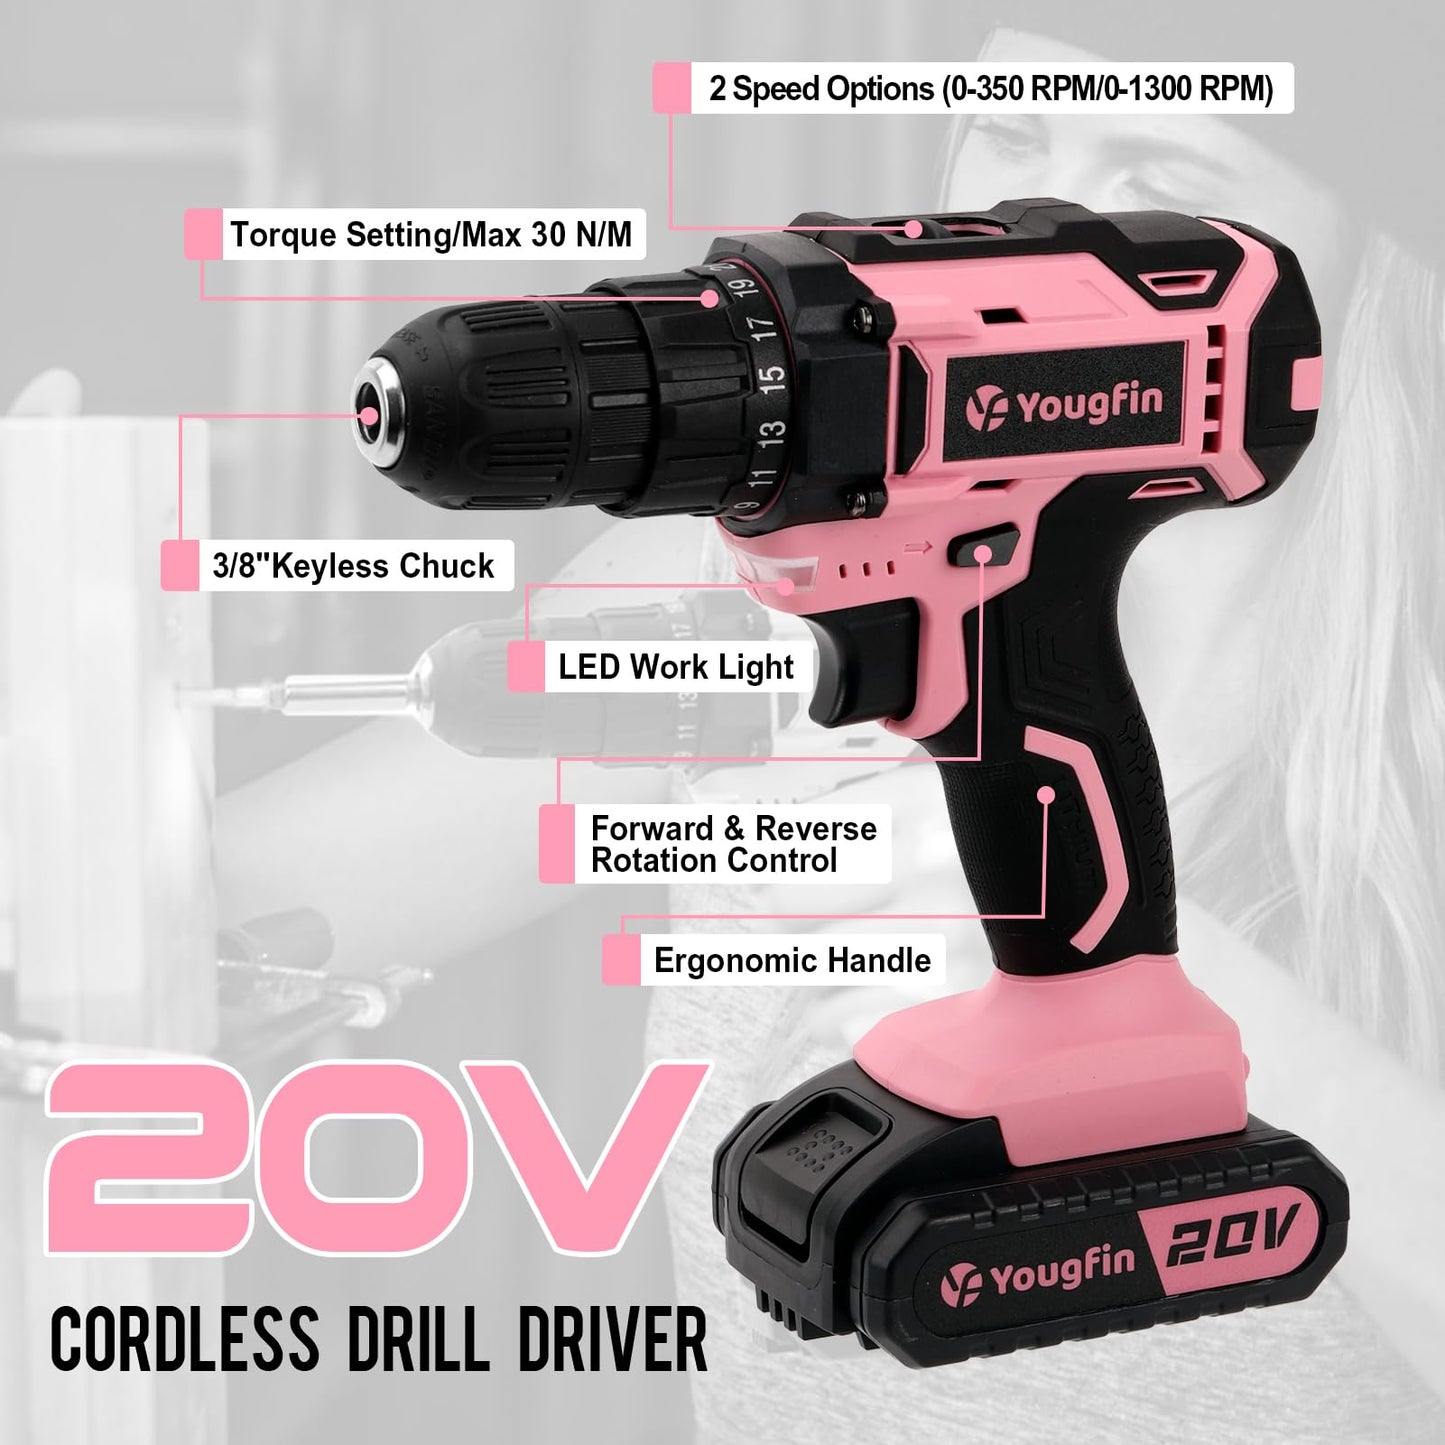 Yougfin Cordless Drill Set Pink For Ladies, 20V Power Drill Driver With Battery & Charger, 3/8" Keyless Chuck, Variable Speed, 25+1 Torque Setting,